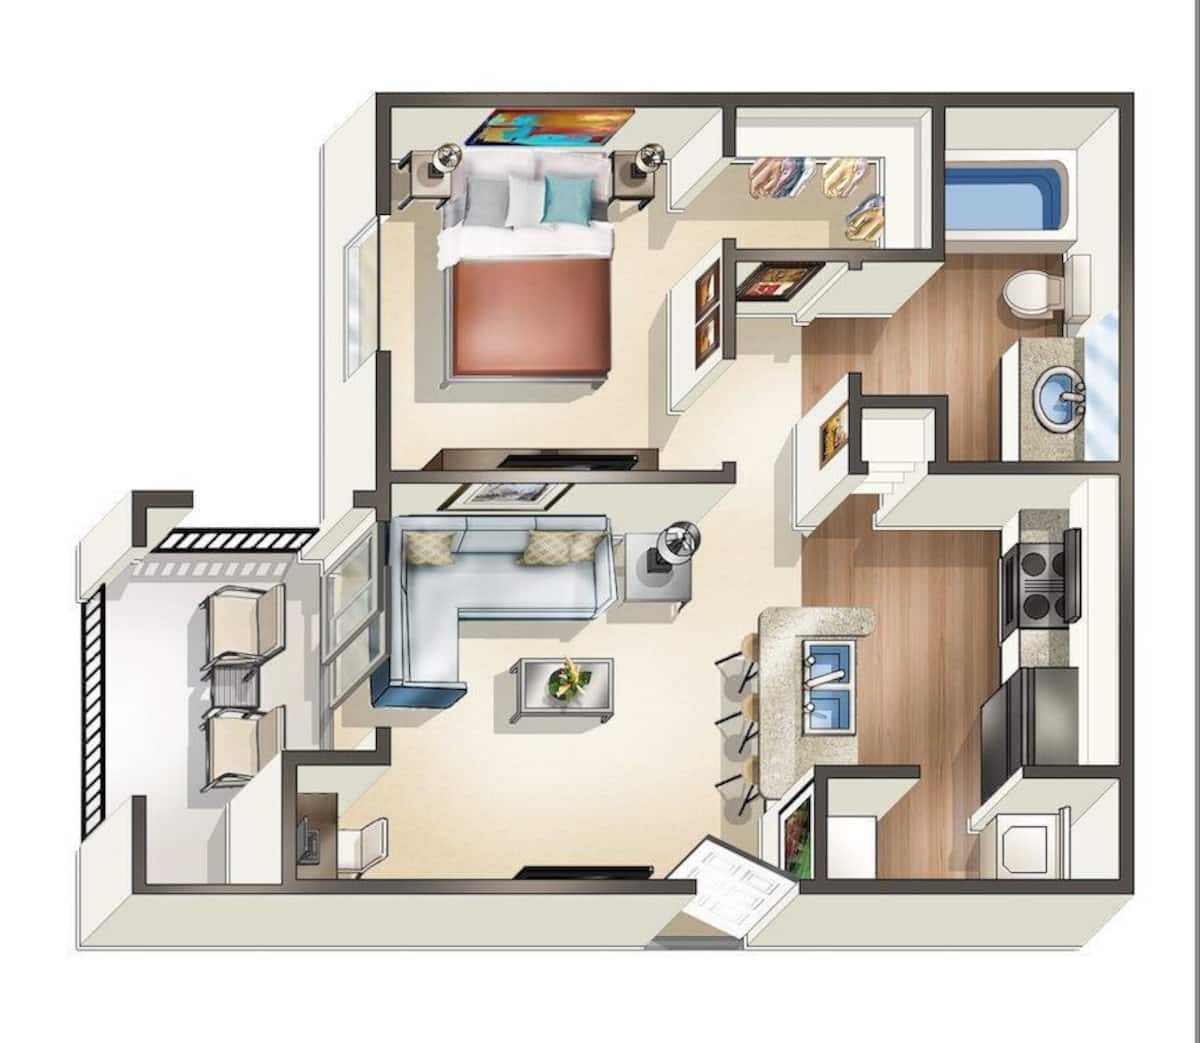 Floorplan diagram for A1A - R2, showing 1 bedroom